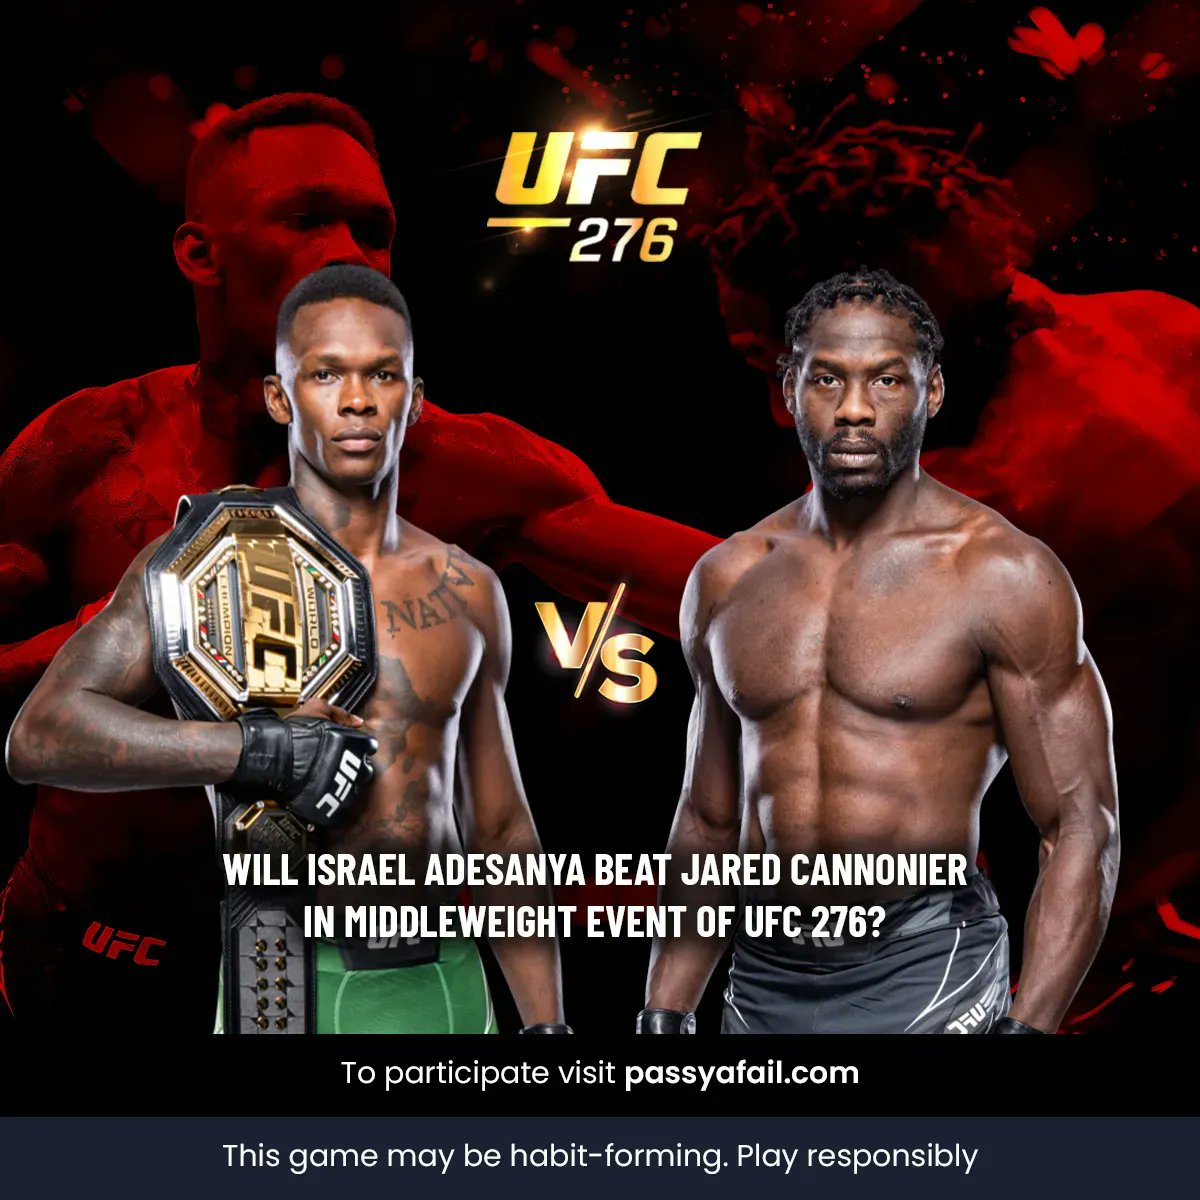 #ContestAlert

Vote pass ya fail now and stand a chance to win REAL CASH prizes!

Will #IsraelAdesanya beat #JaredCannonier in middleweight event of #UFC276? 

Vote now at buff.ly/43eJ5gZ